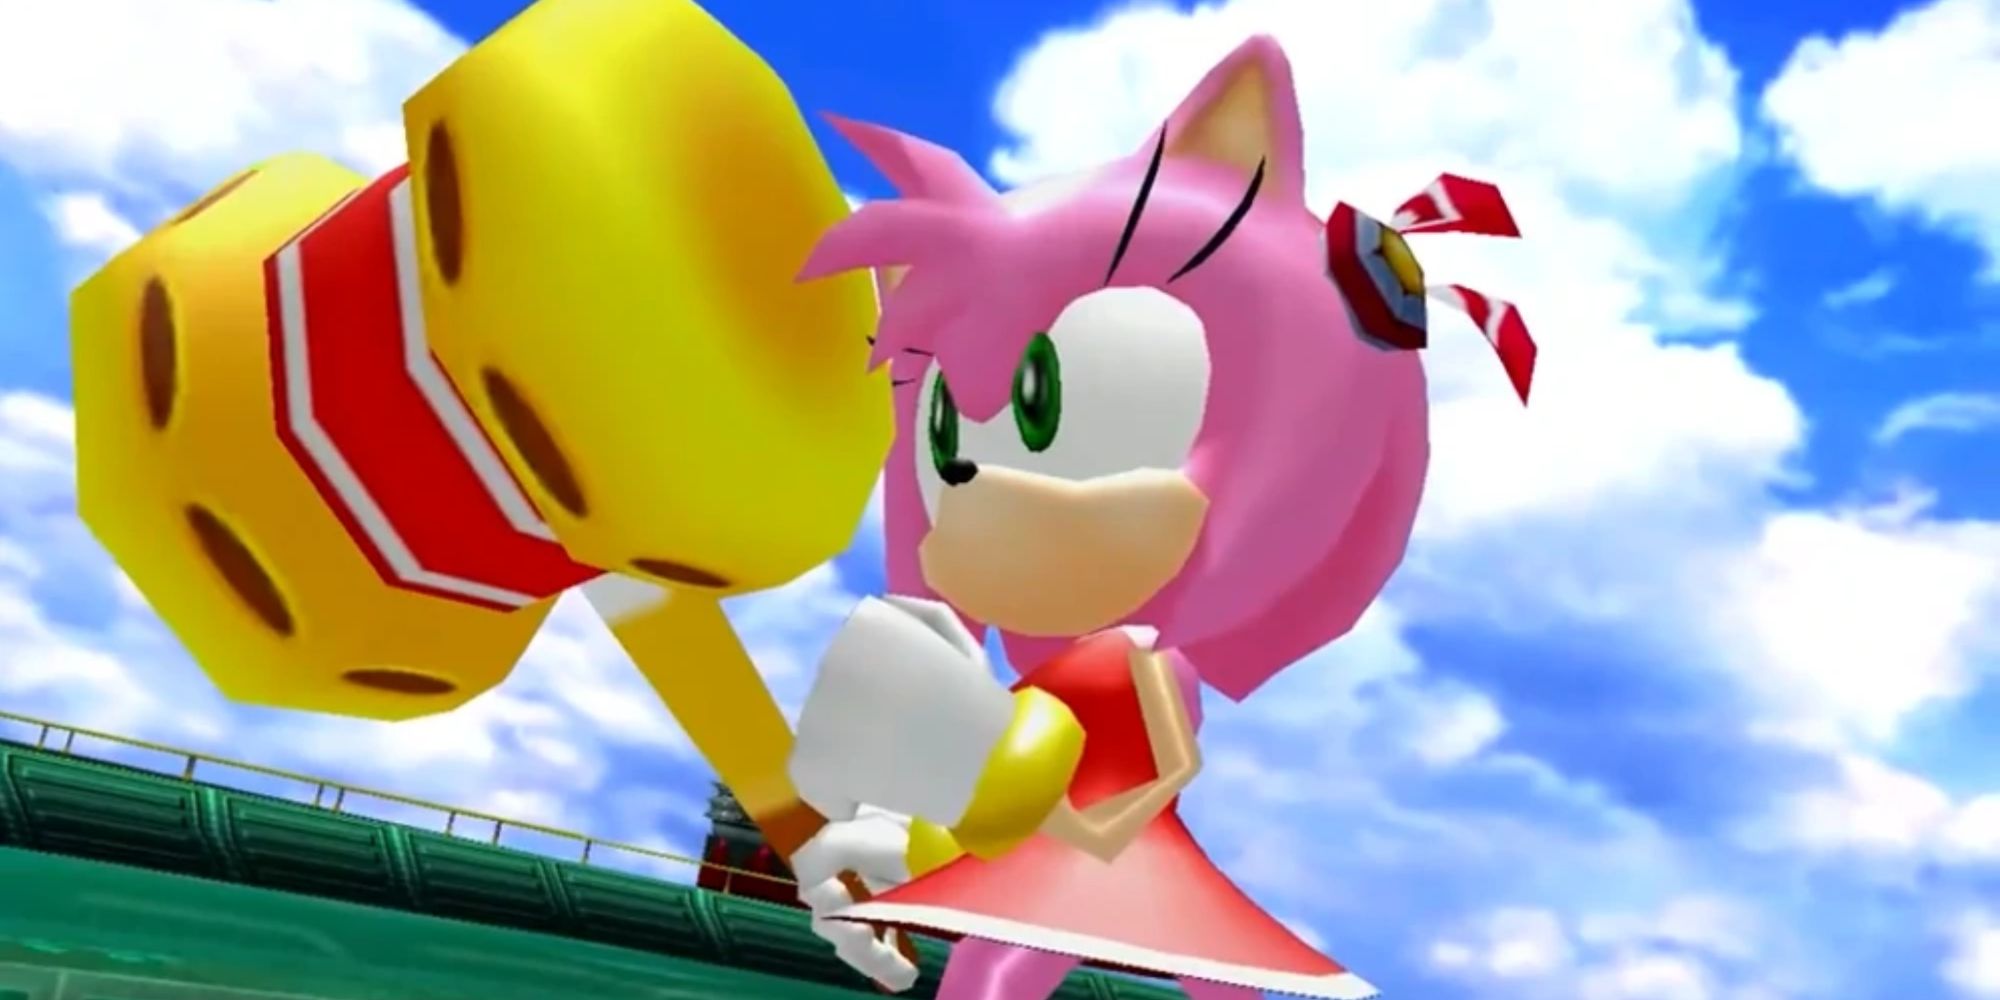 Amy Rose with the Piko Piko Hammer